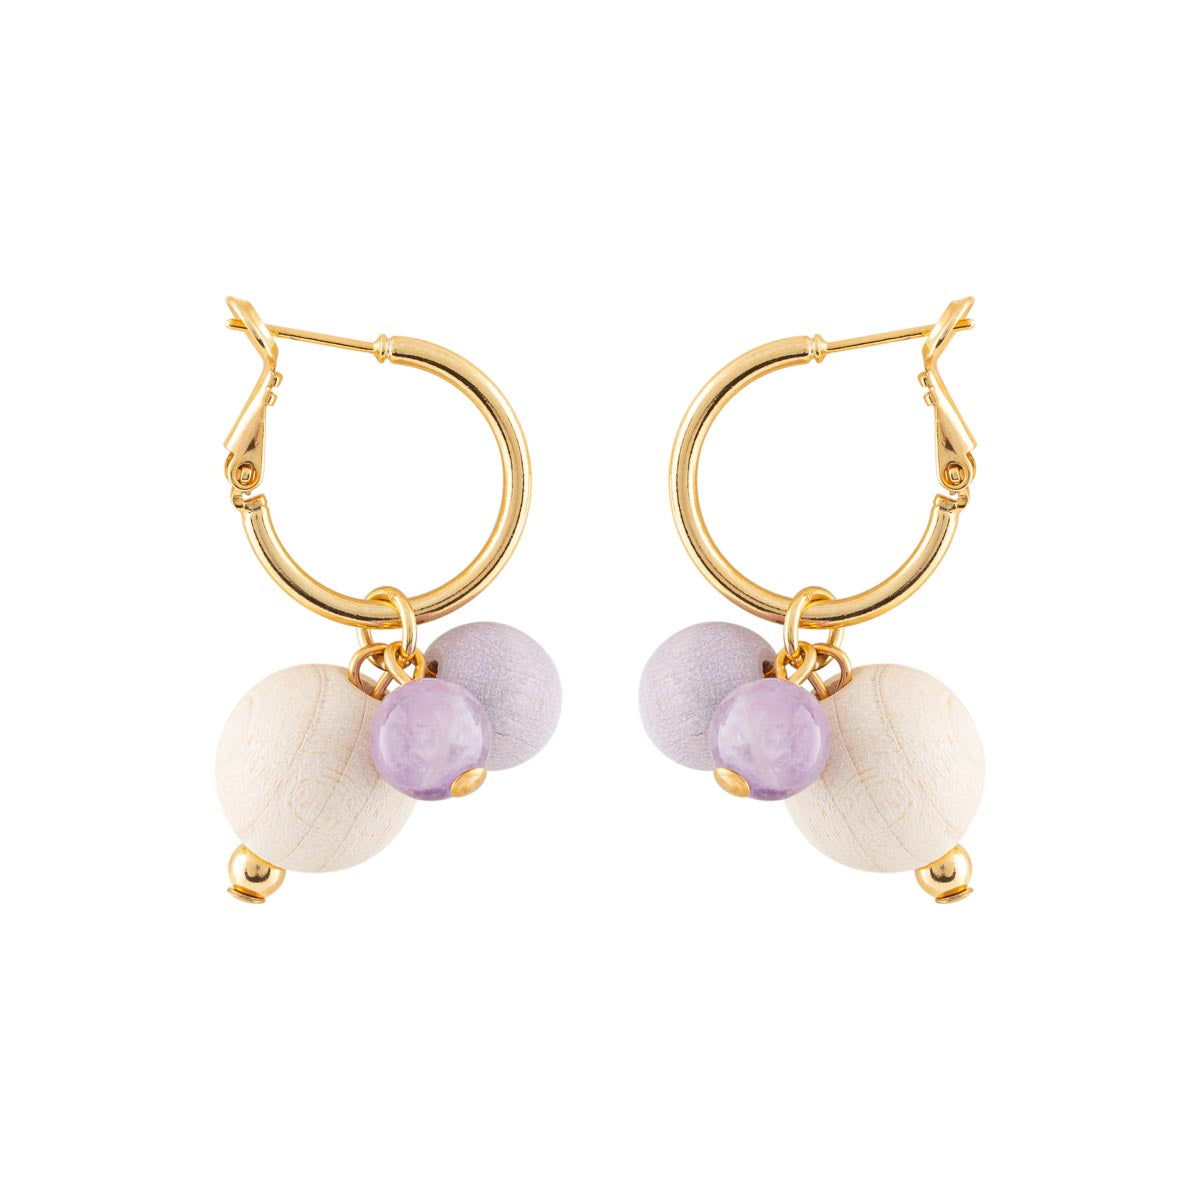 Lydia earrings, purple, white and gold